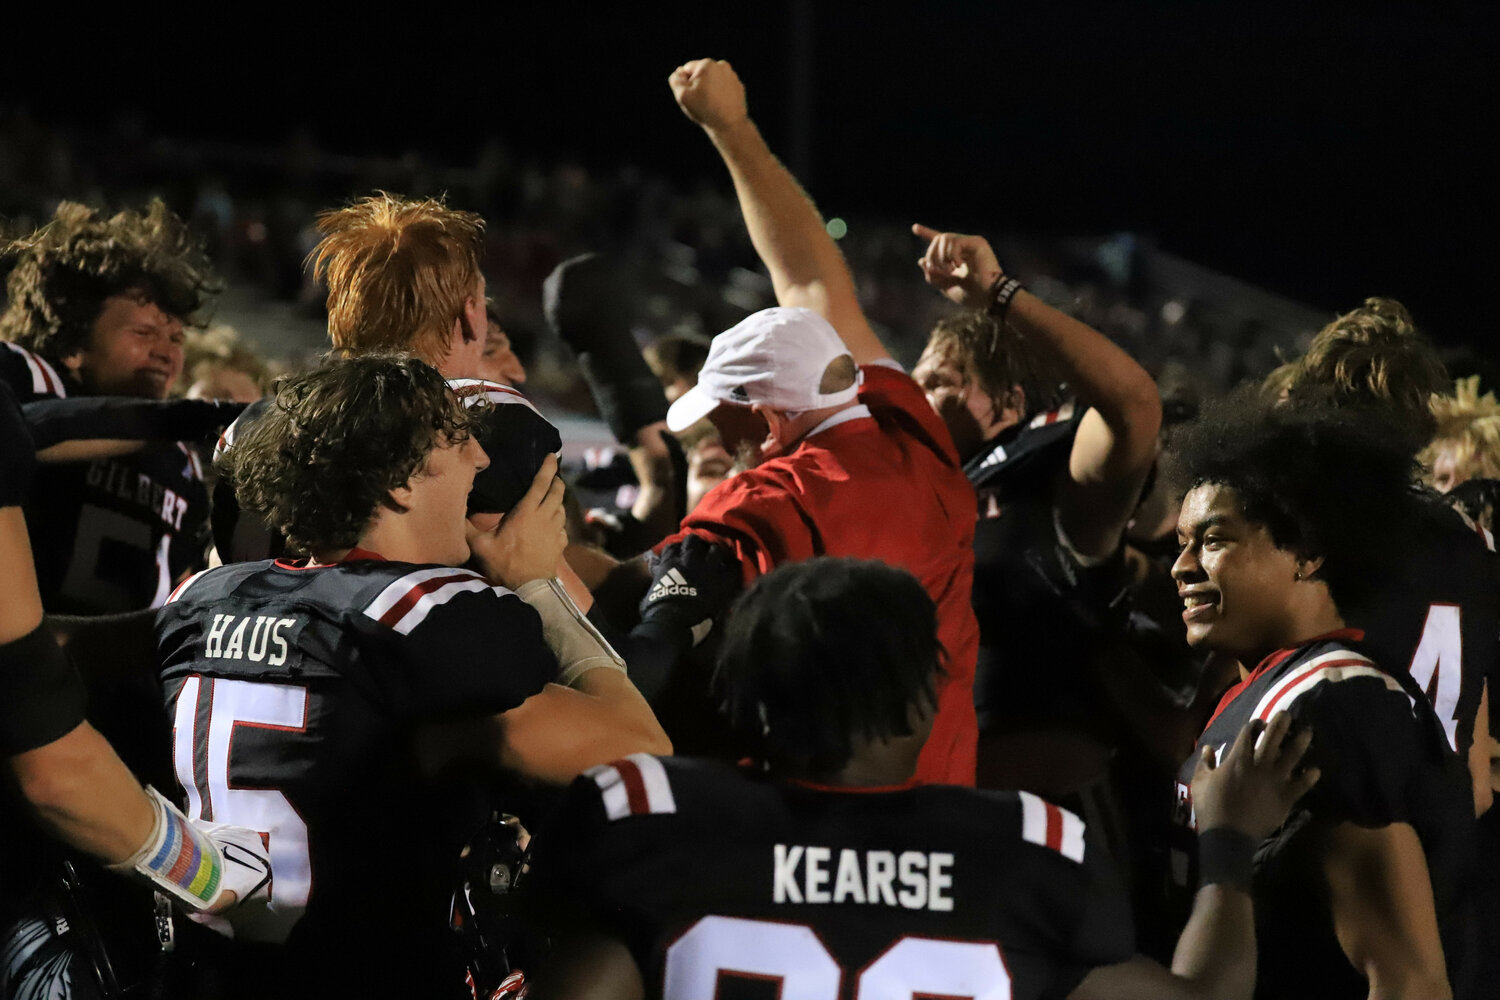 Gilbert head coach Chad Leaphart celebrates with his team after their 14-3 win over Lexington.